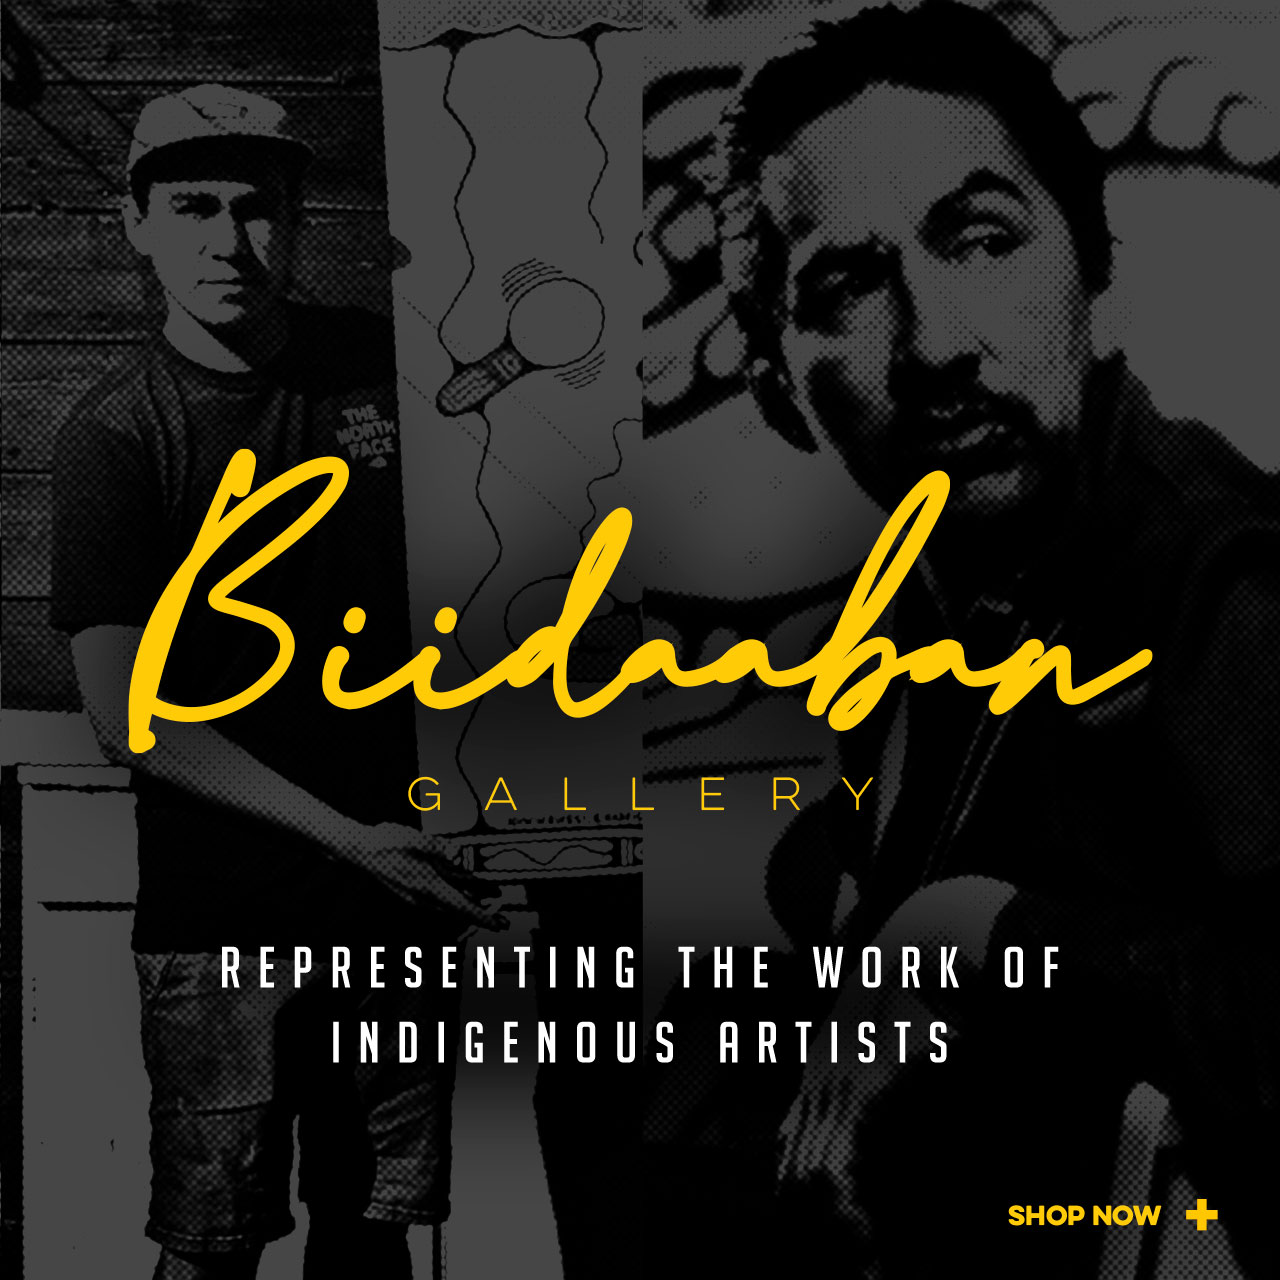 Biidaaban Gallery - Representing the work of Indigenous Artists